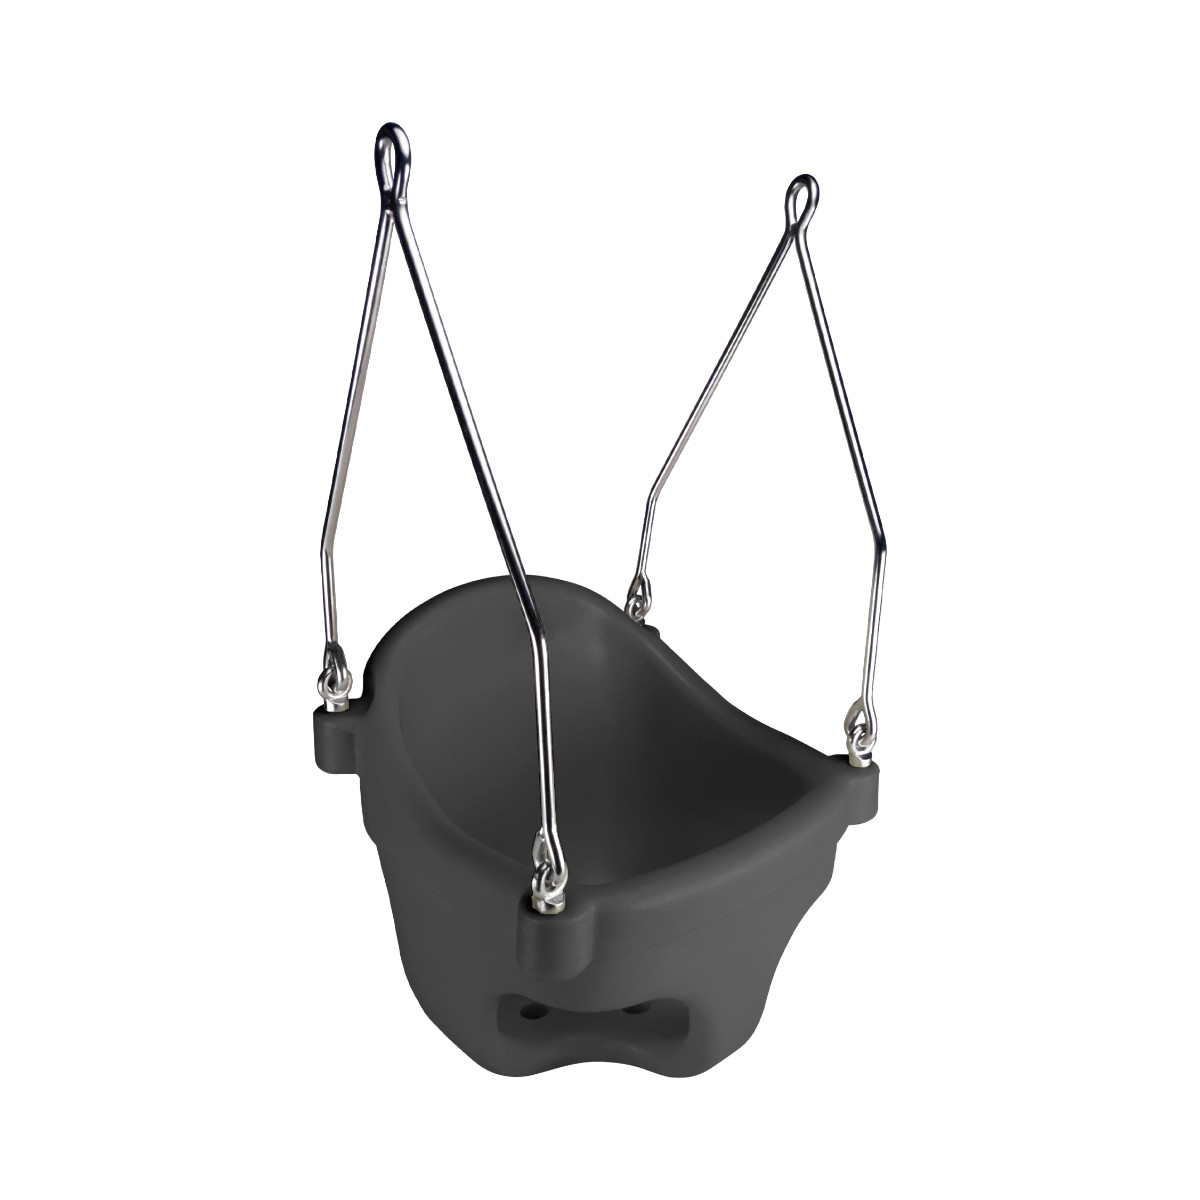 Roto-Molded Infant Swing Seat (S175)